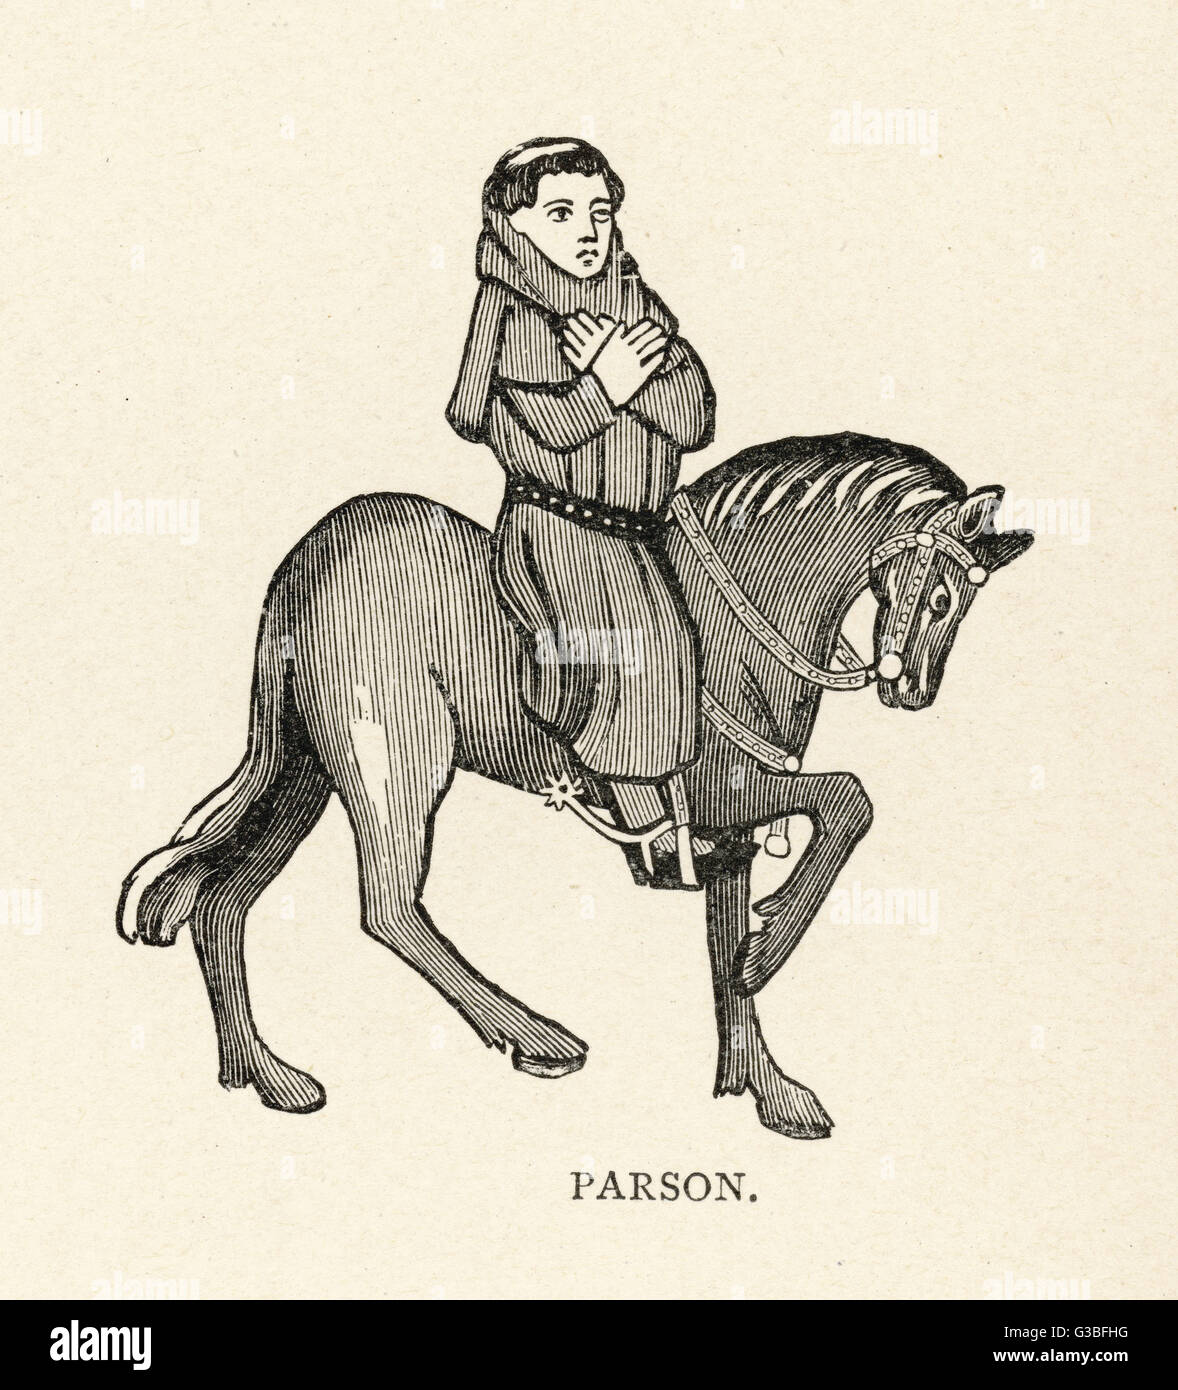 CHAUCER, THE PARSON Stock Photo